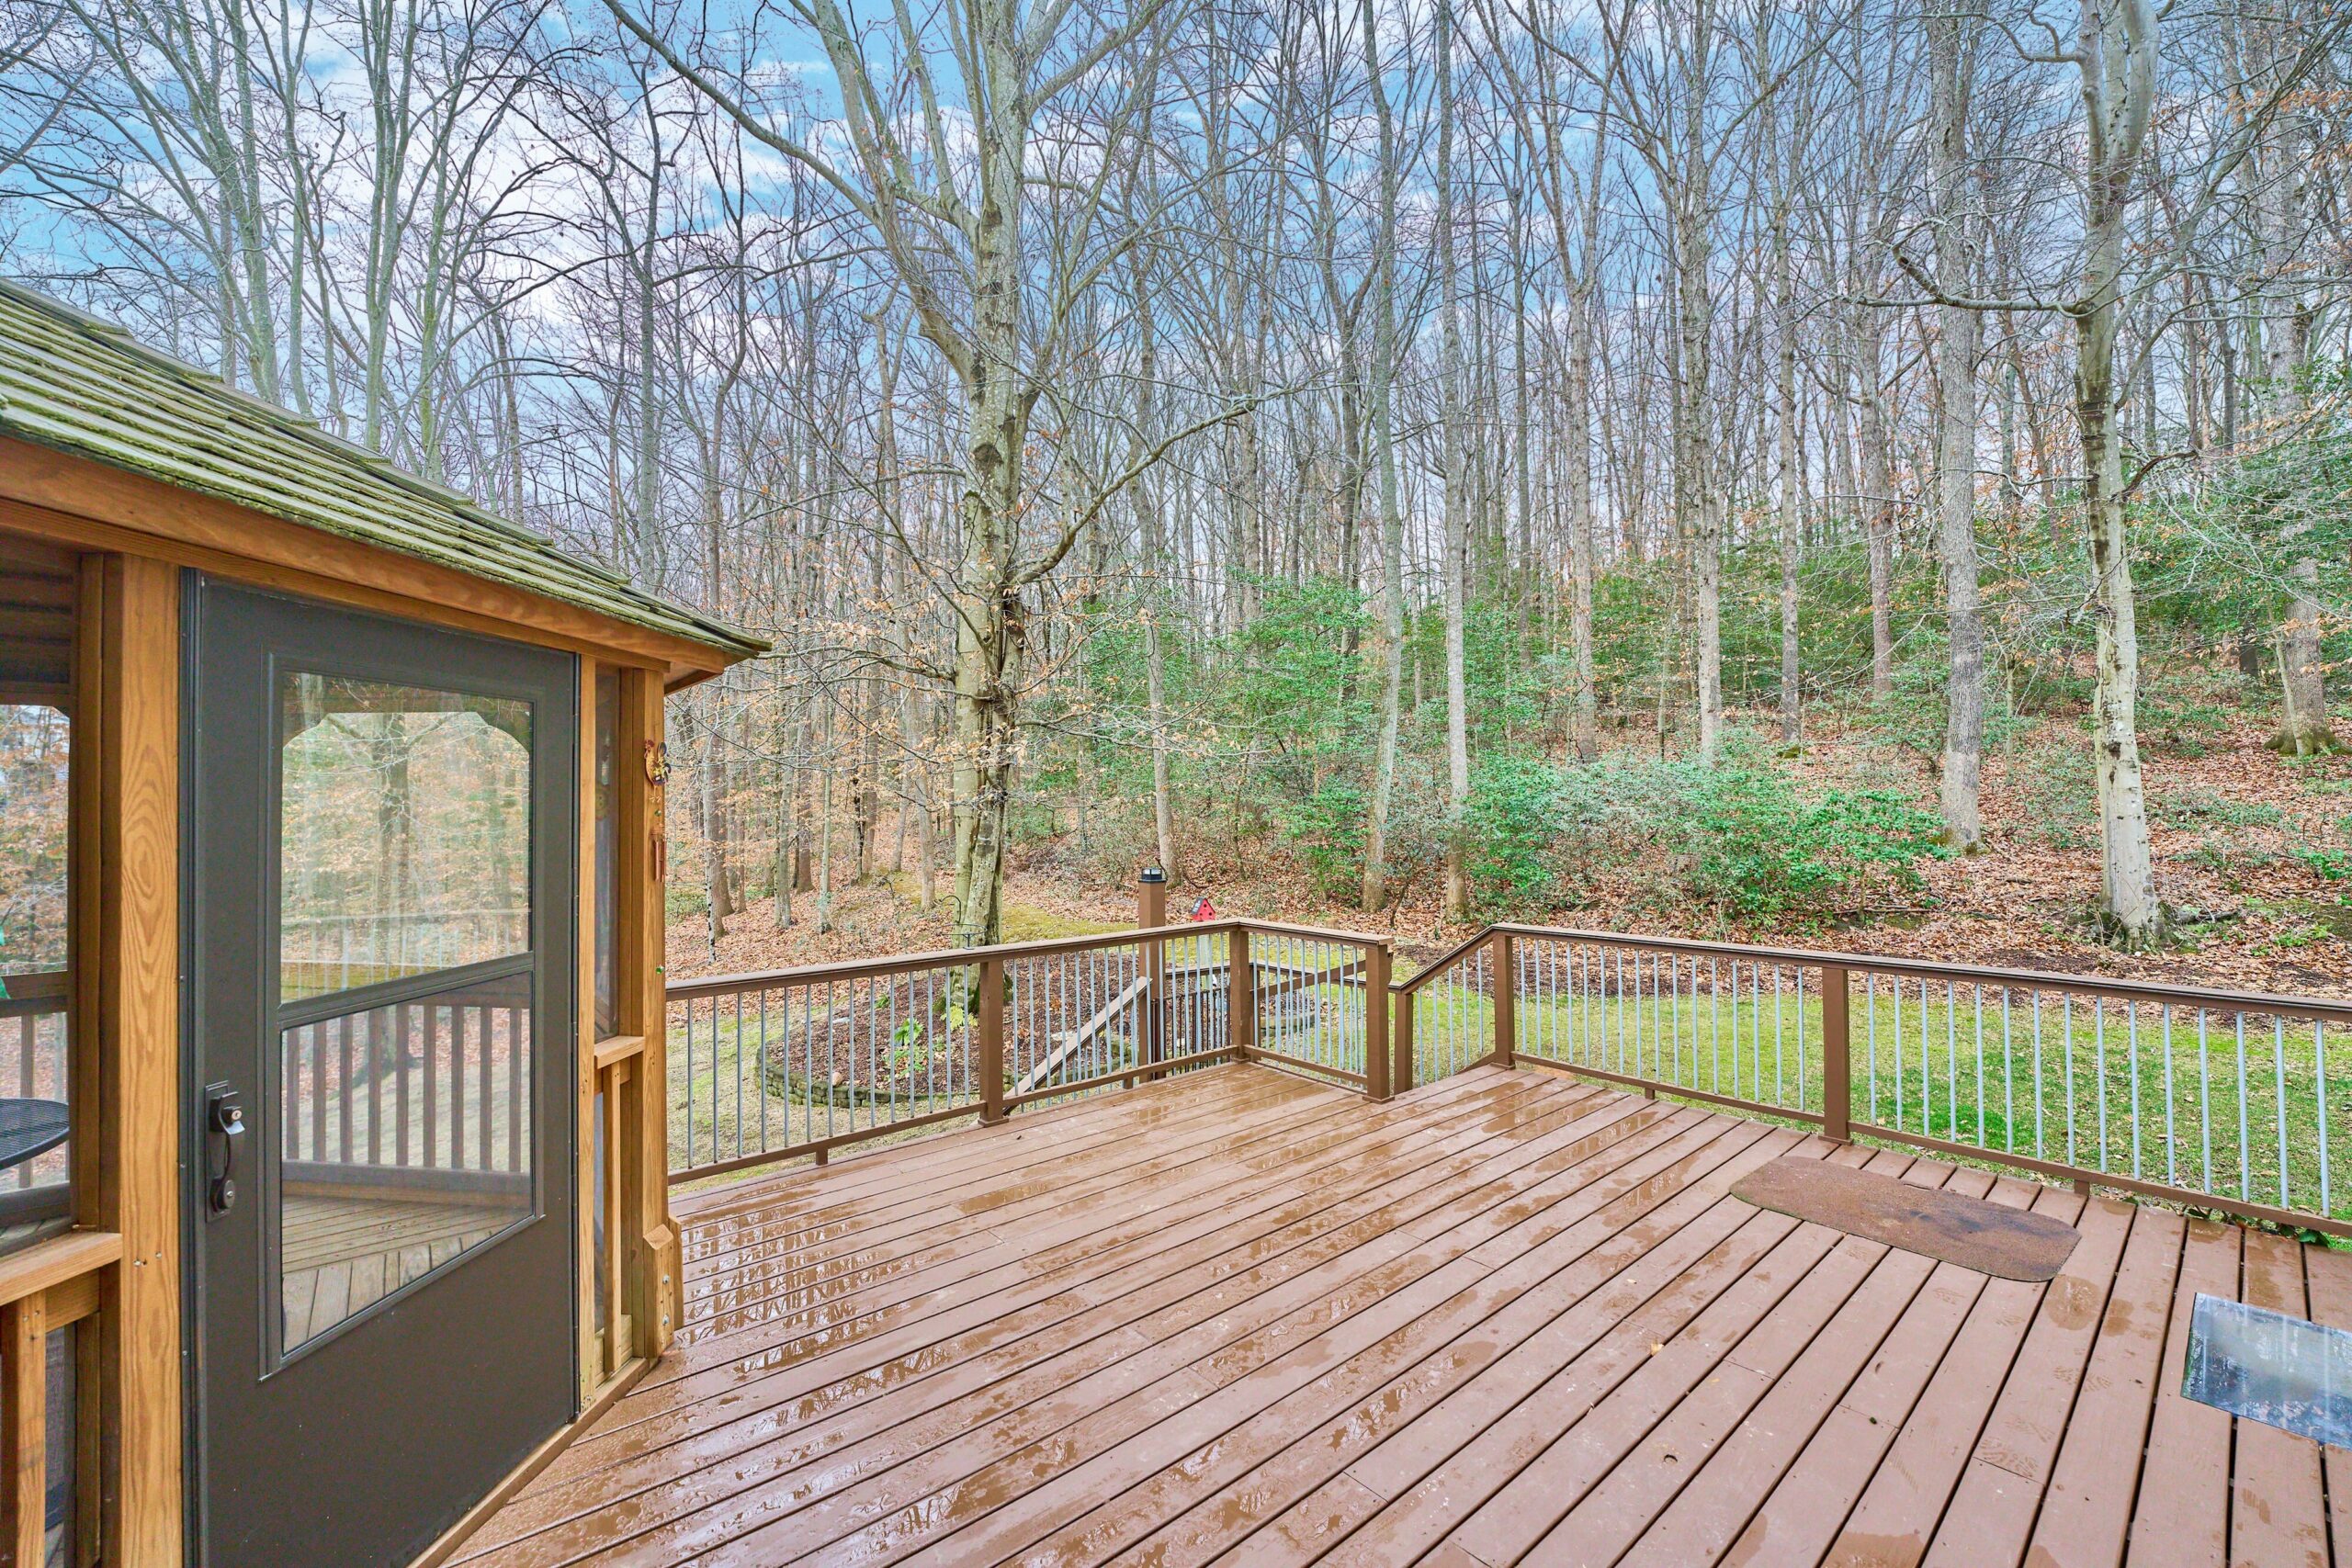 Professional exterior photo of 80 Brentsmill Drive in Stafford, Virginia - showing the rear deck looking out to the right into the woods